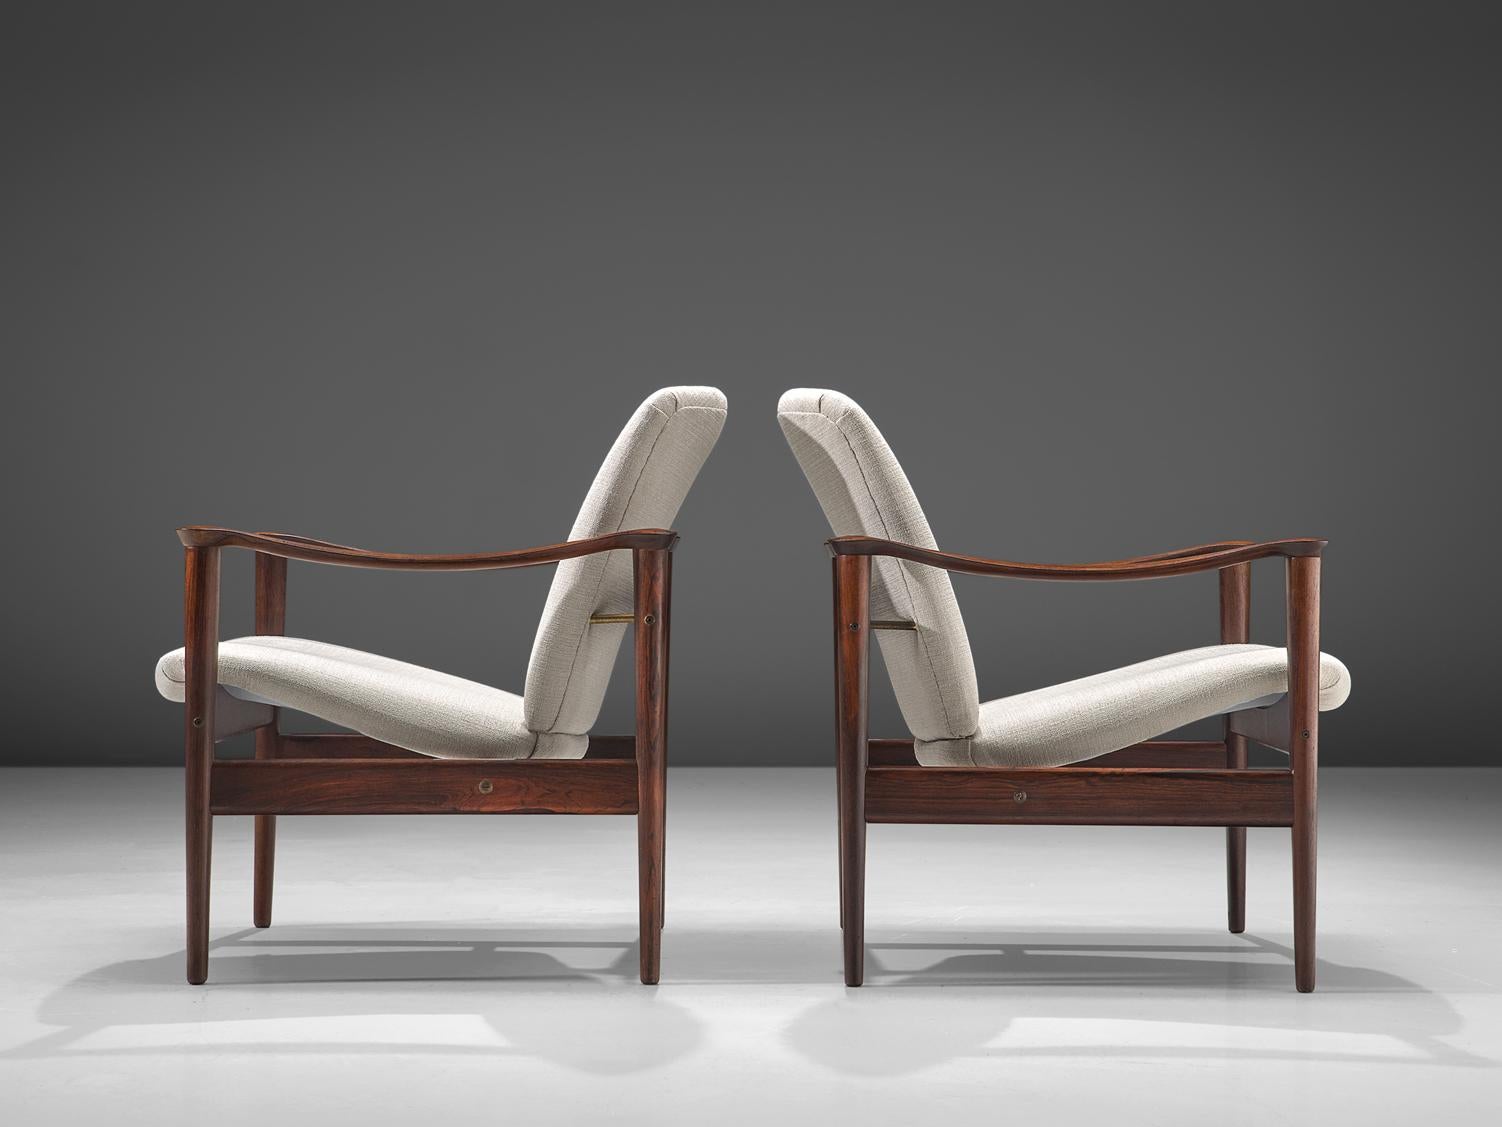 Fredrik A. Kayser for Vatne Lenestolfabrikk, armchairs model 711, rosewood and white fabric, Norway, 1960.

These armchairs are designed by Frederik A. Kayser and executed by Vatne Lenestolfabrikk. The armchairs are executed in rosewood, fabric